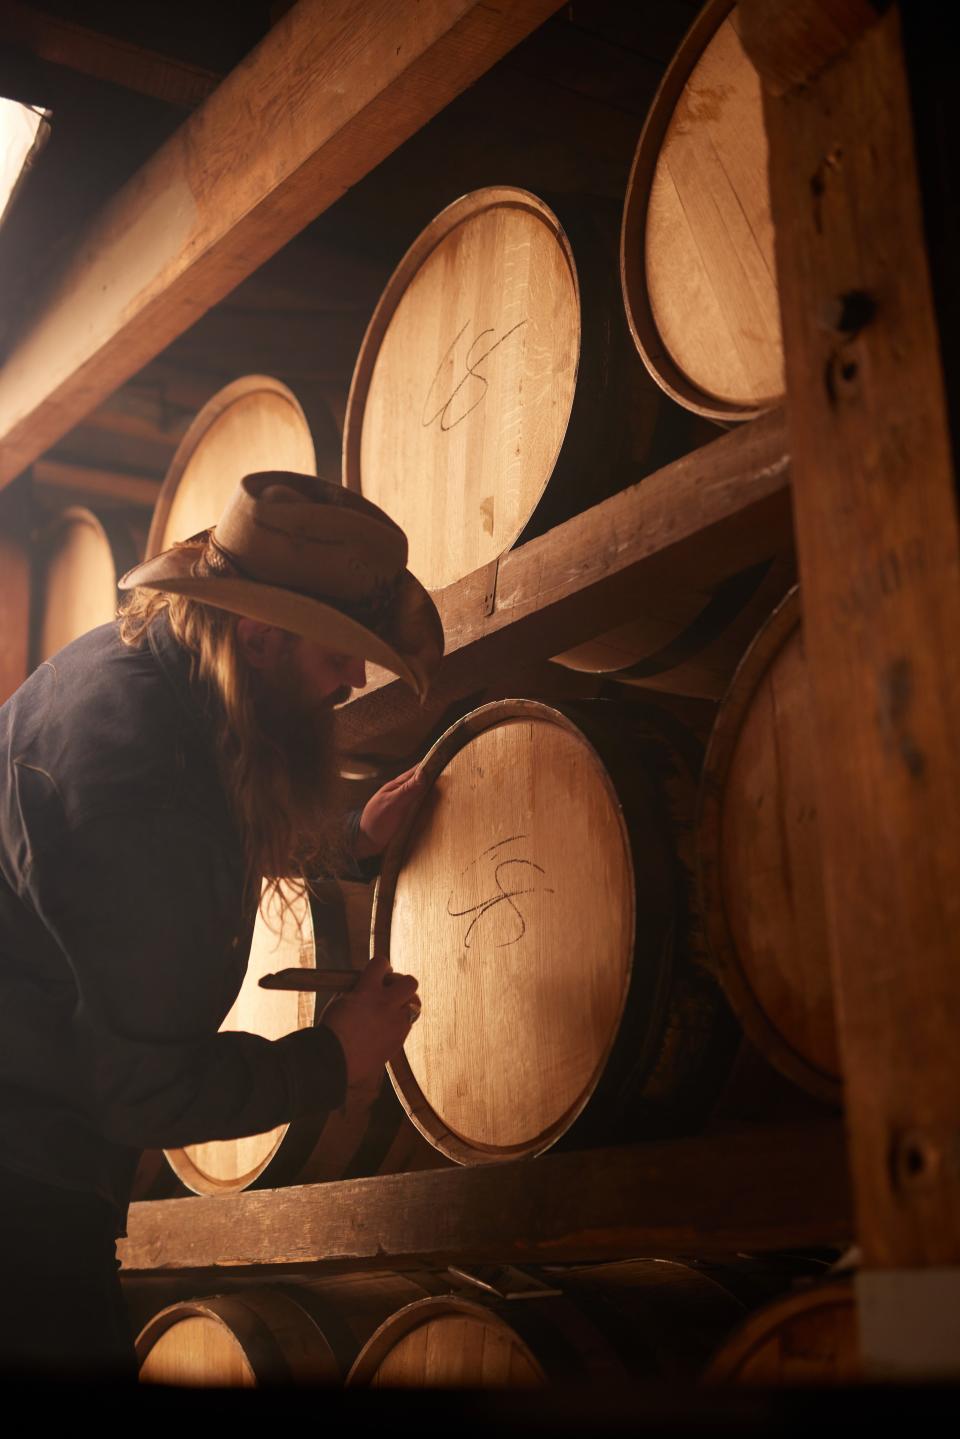 Chris Stapleton teamed with Buffalo Trace on Traveller Whiskey. Here he is at the distillery signing some barrels.